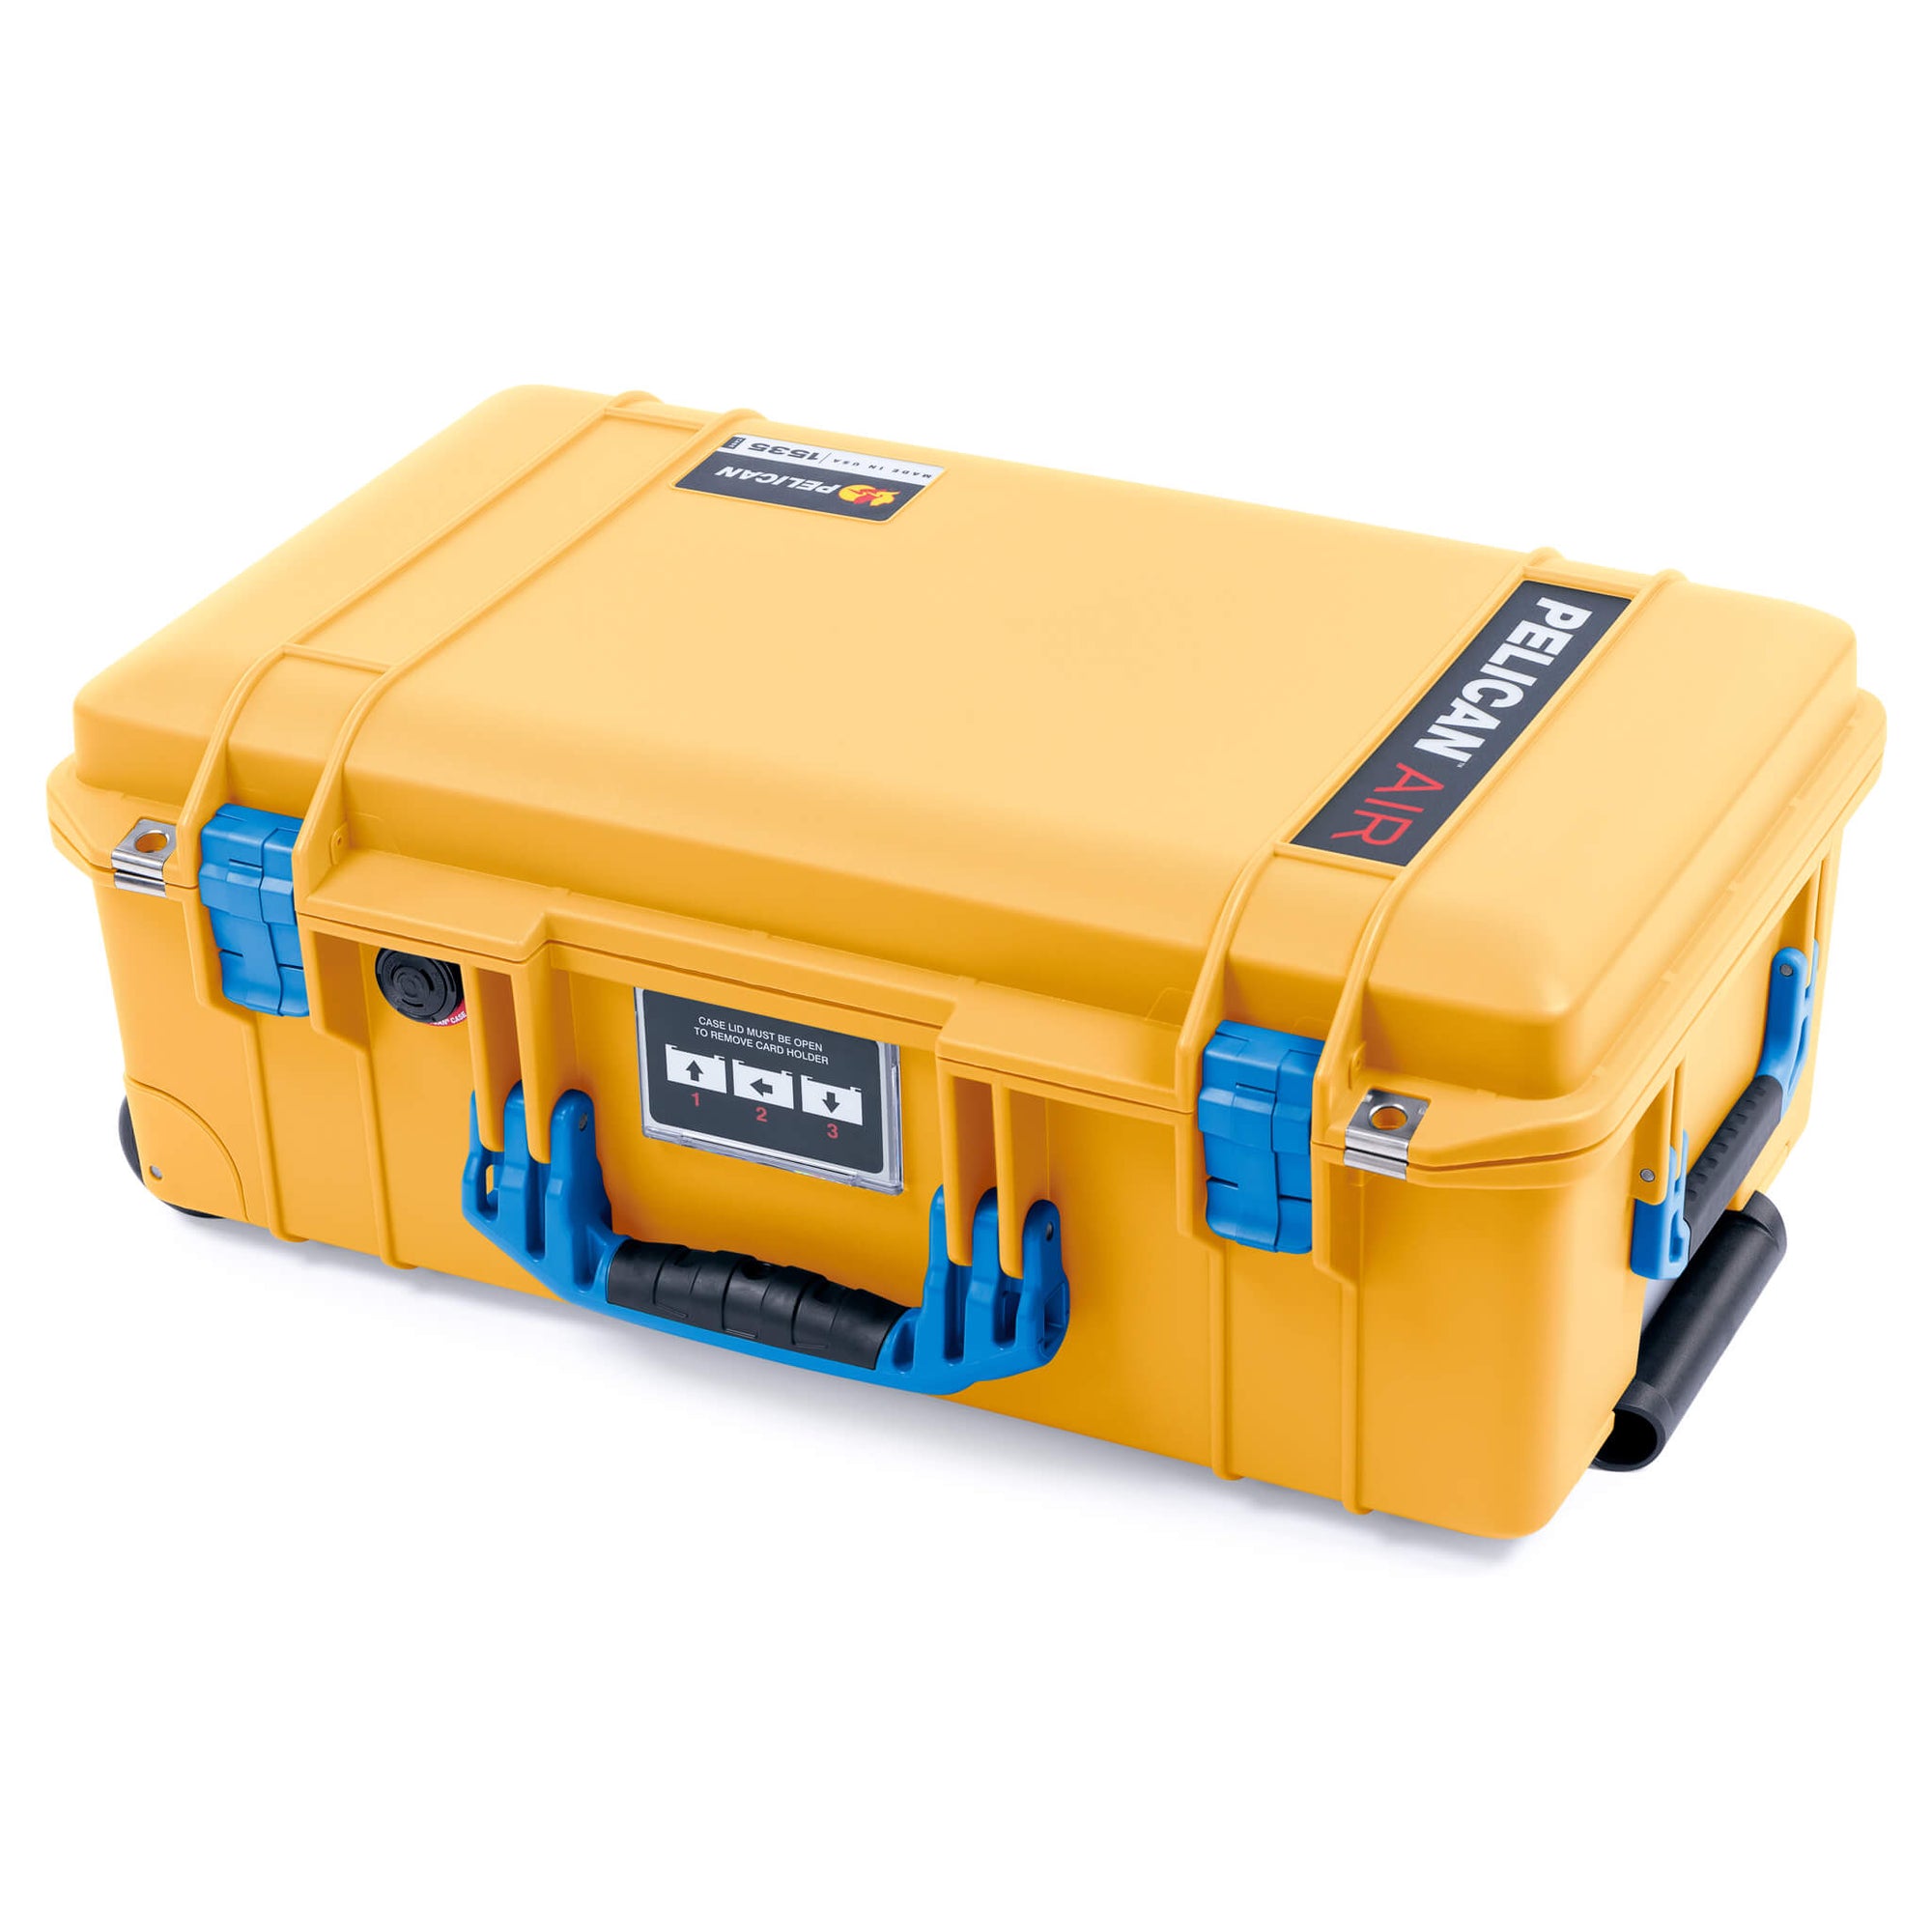 Pelican 1535 Air Case, Yellow with Blue Handles & Latches ColorCase 